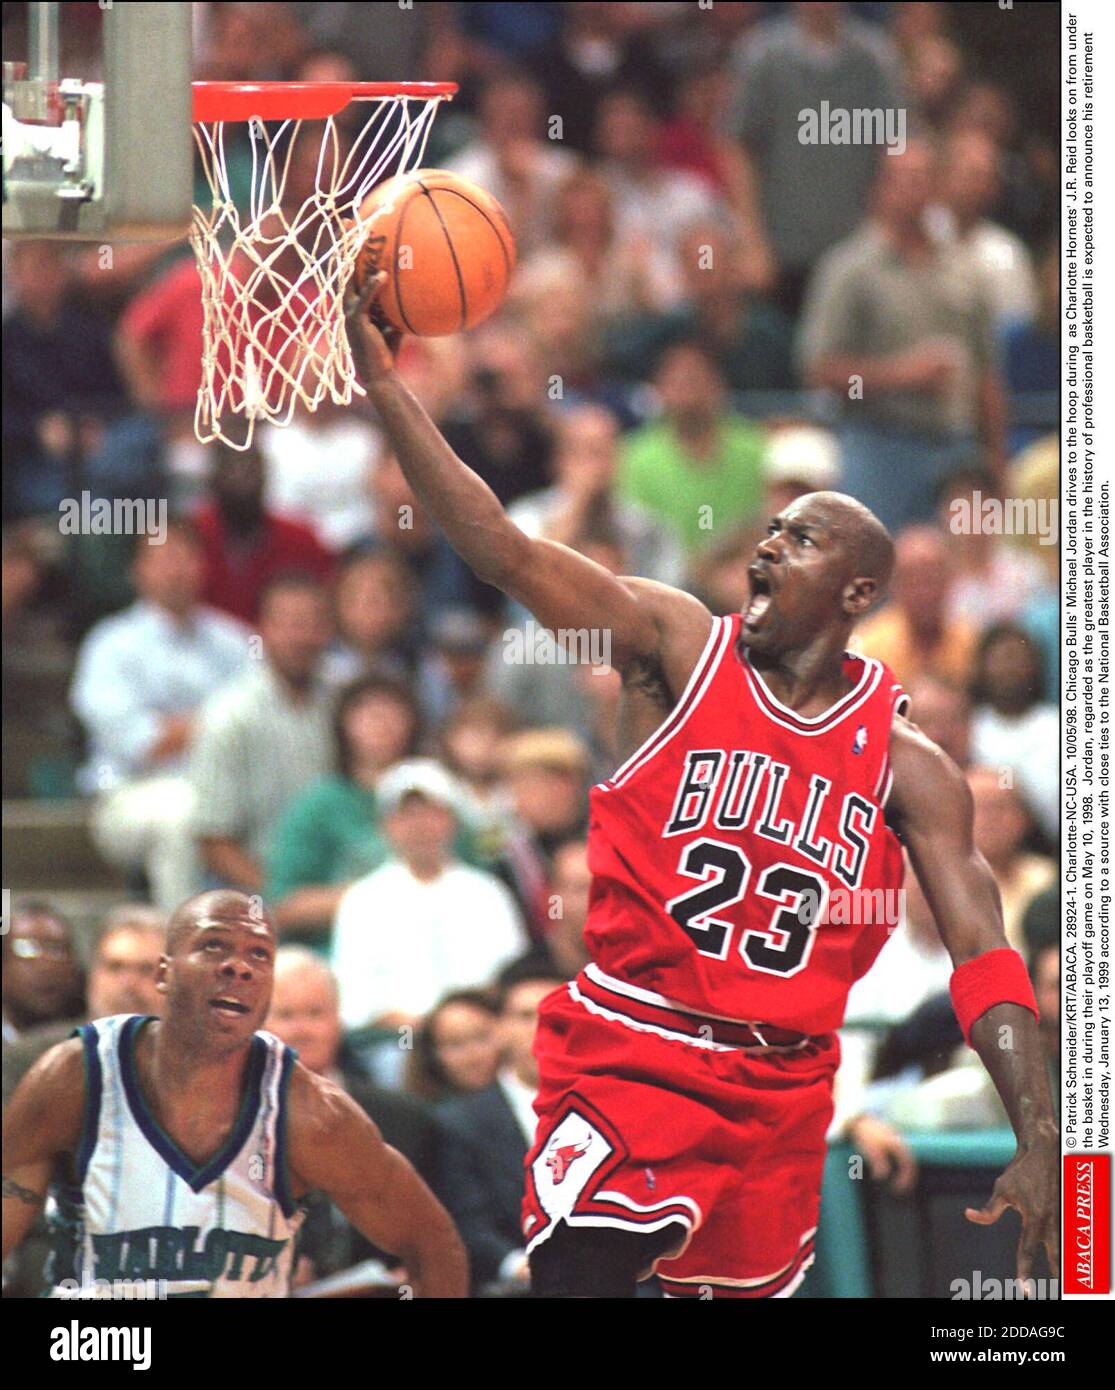 NO FILM, NO VIDEO, NO TV, NO DOCUMENTARY - © Patrick Schneider/KRT/ABACA. 28924-1. Charlotte-NC-USA. 10/05/98. Chicago Bulls' Michael Jordan drives to the hoop during as Charlotte Hornets' J.R. Reid looks on from under the basket in during their playoff game on May 10, 1998. Jordan, regarded as th Stock Photo